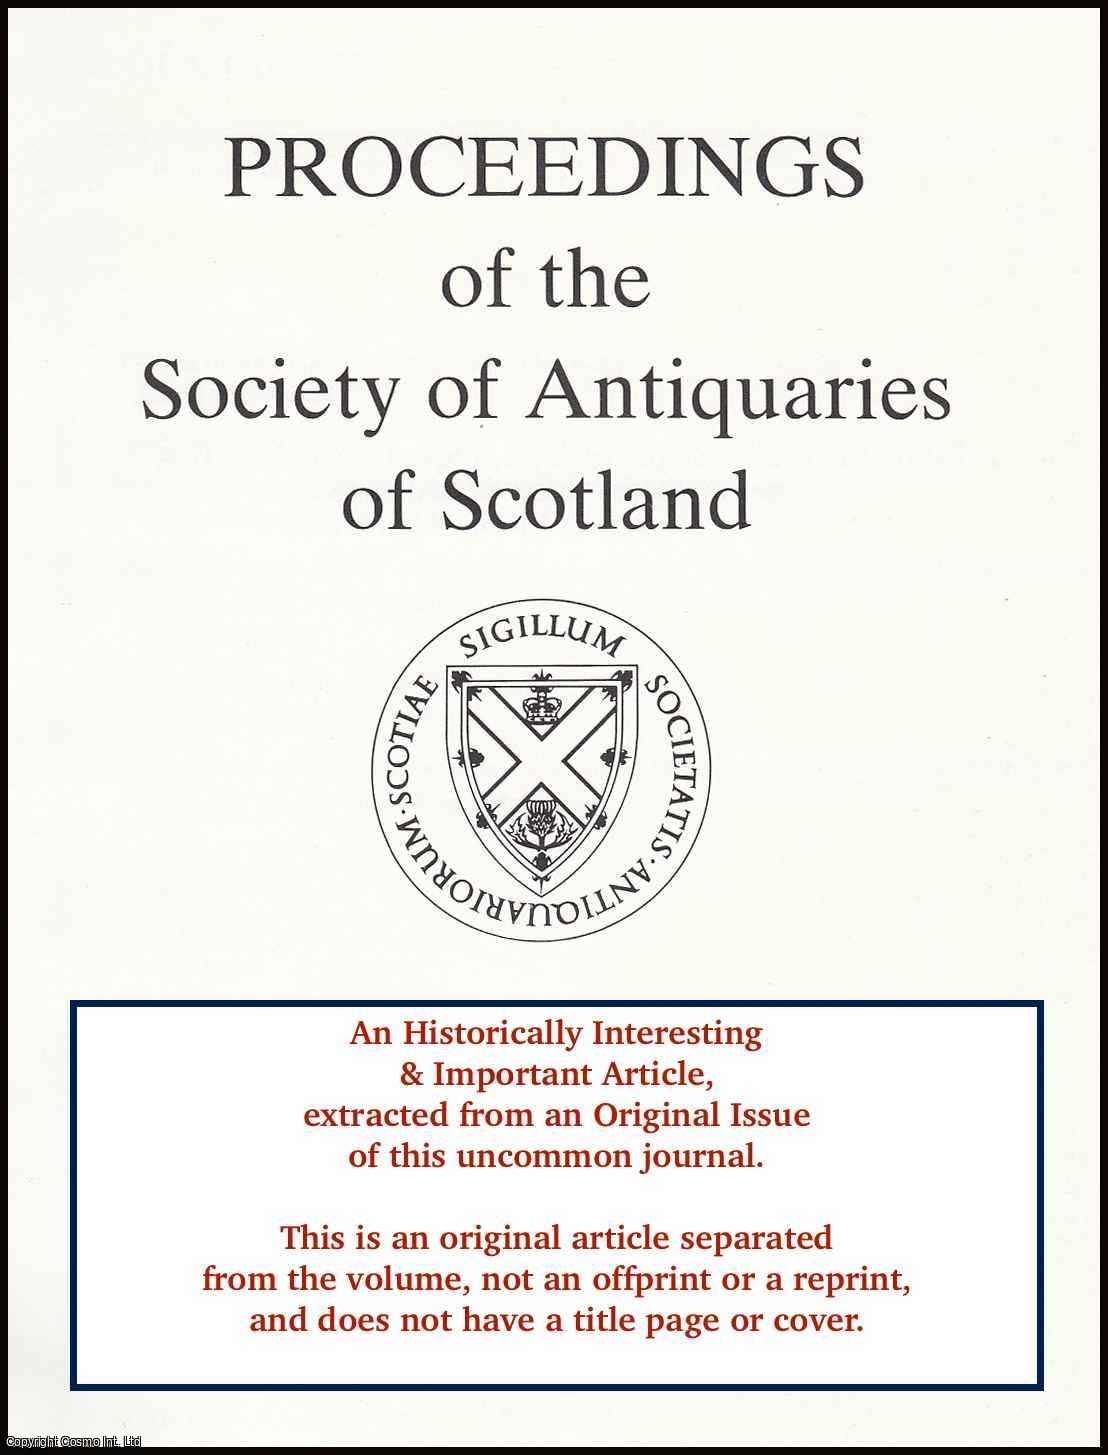 David Stevenson & David H. Caldwell - Leather Guns and Other Light Artillery in Mid 17th Century Scotland. An original article from the Proceedings of the Society of Antiquaries of Scotland, 1977.